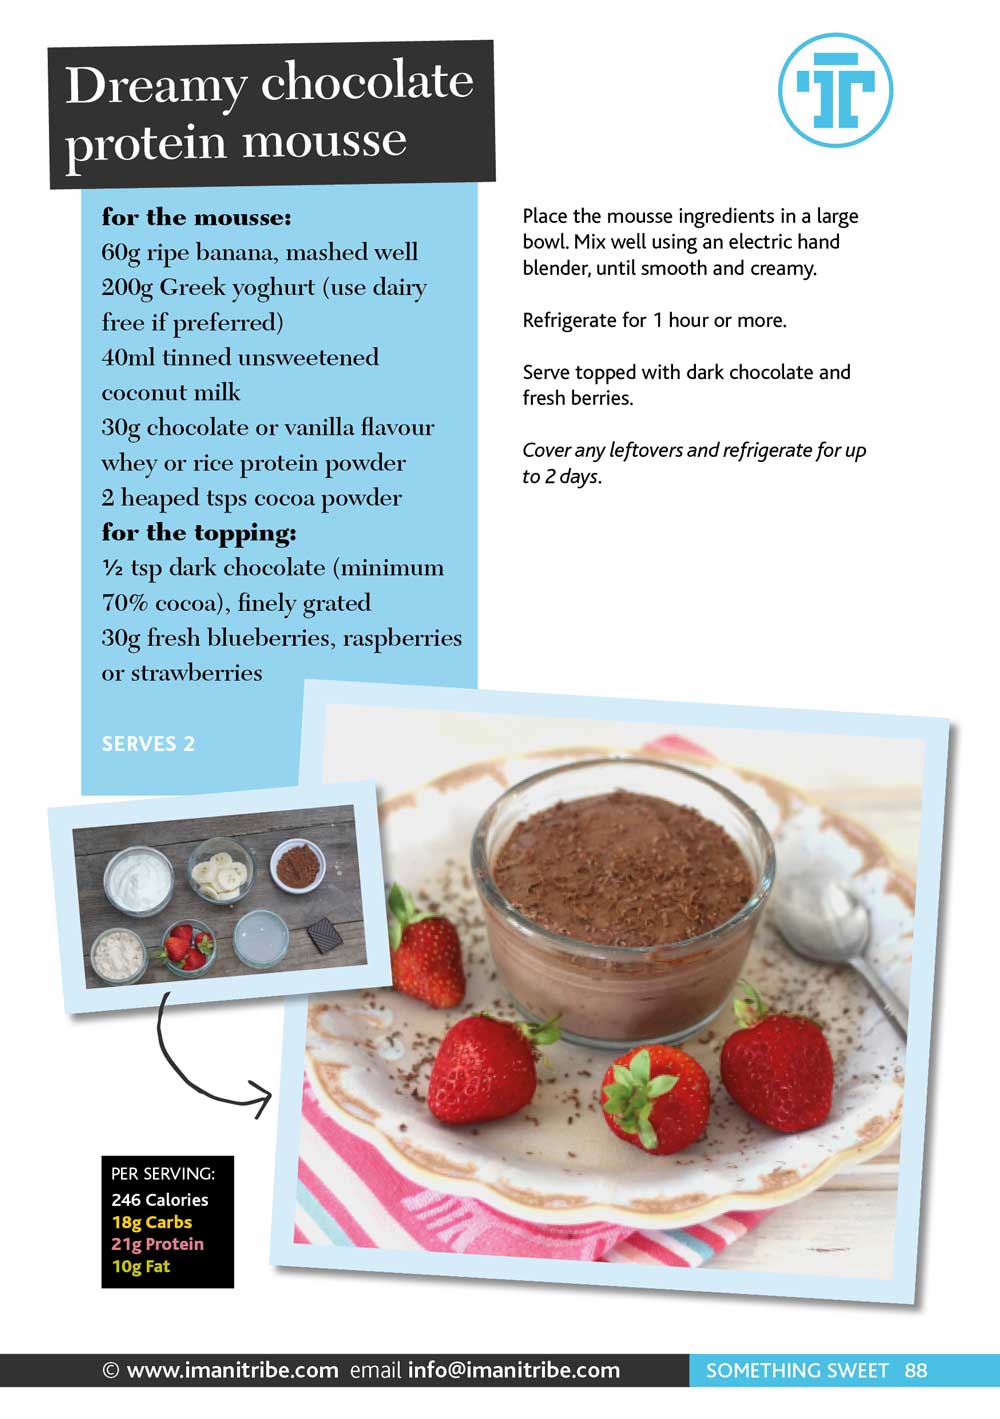 dreamy-chocolate-protein-mousee-recipe